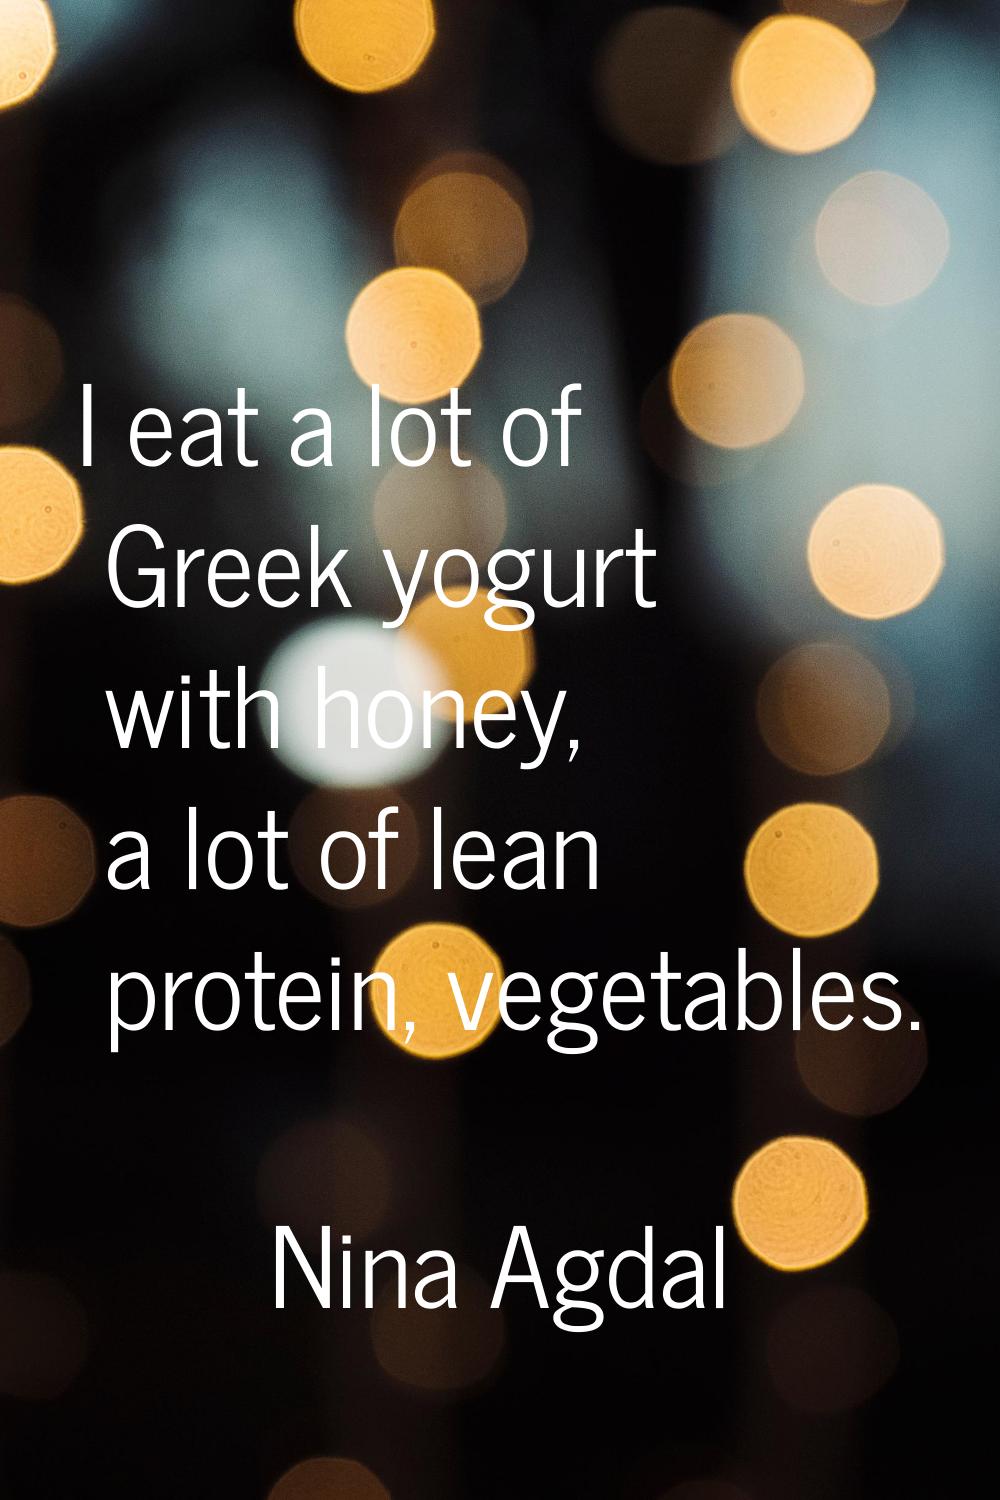 I eat a lot of Greek yogurt with honey, a lot of lean protein, vegetables.